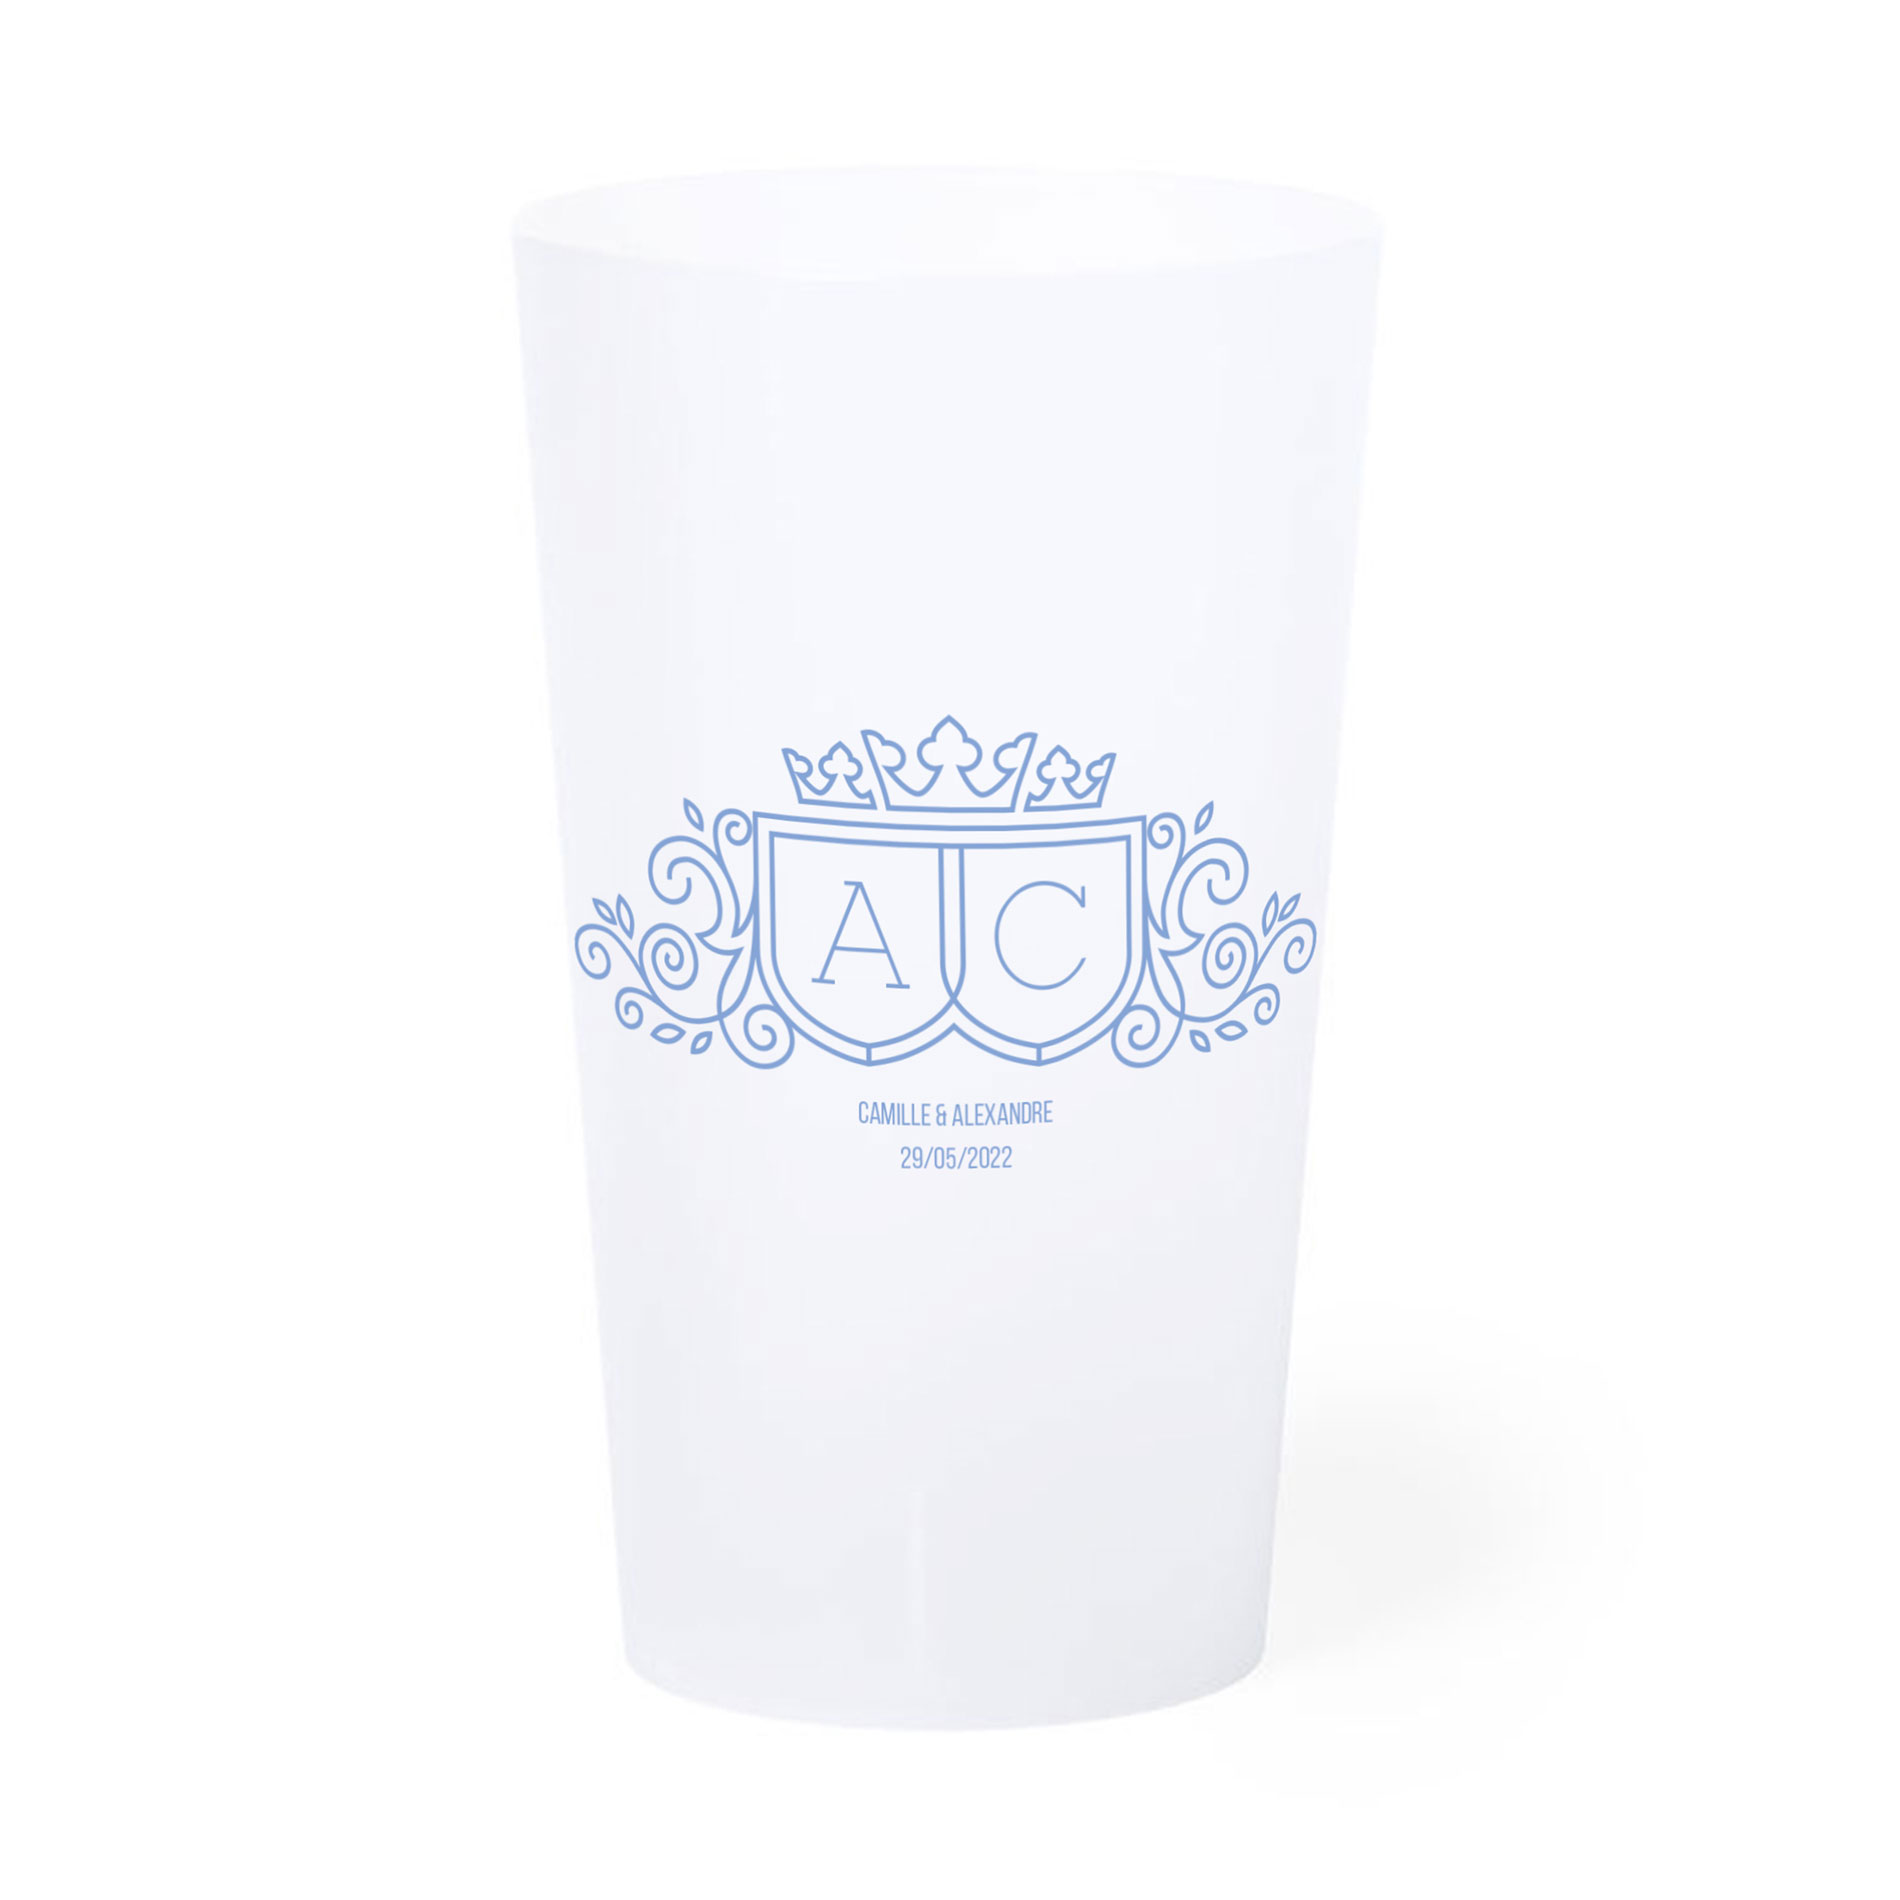 Customized wedding goblet 33 cl - Passion